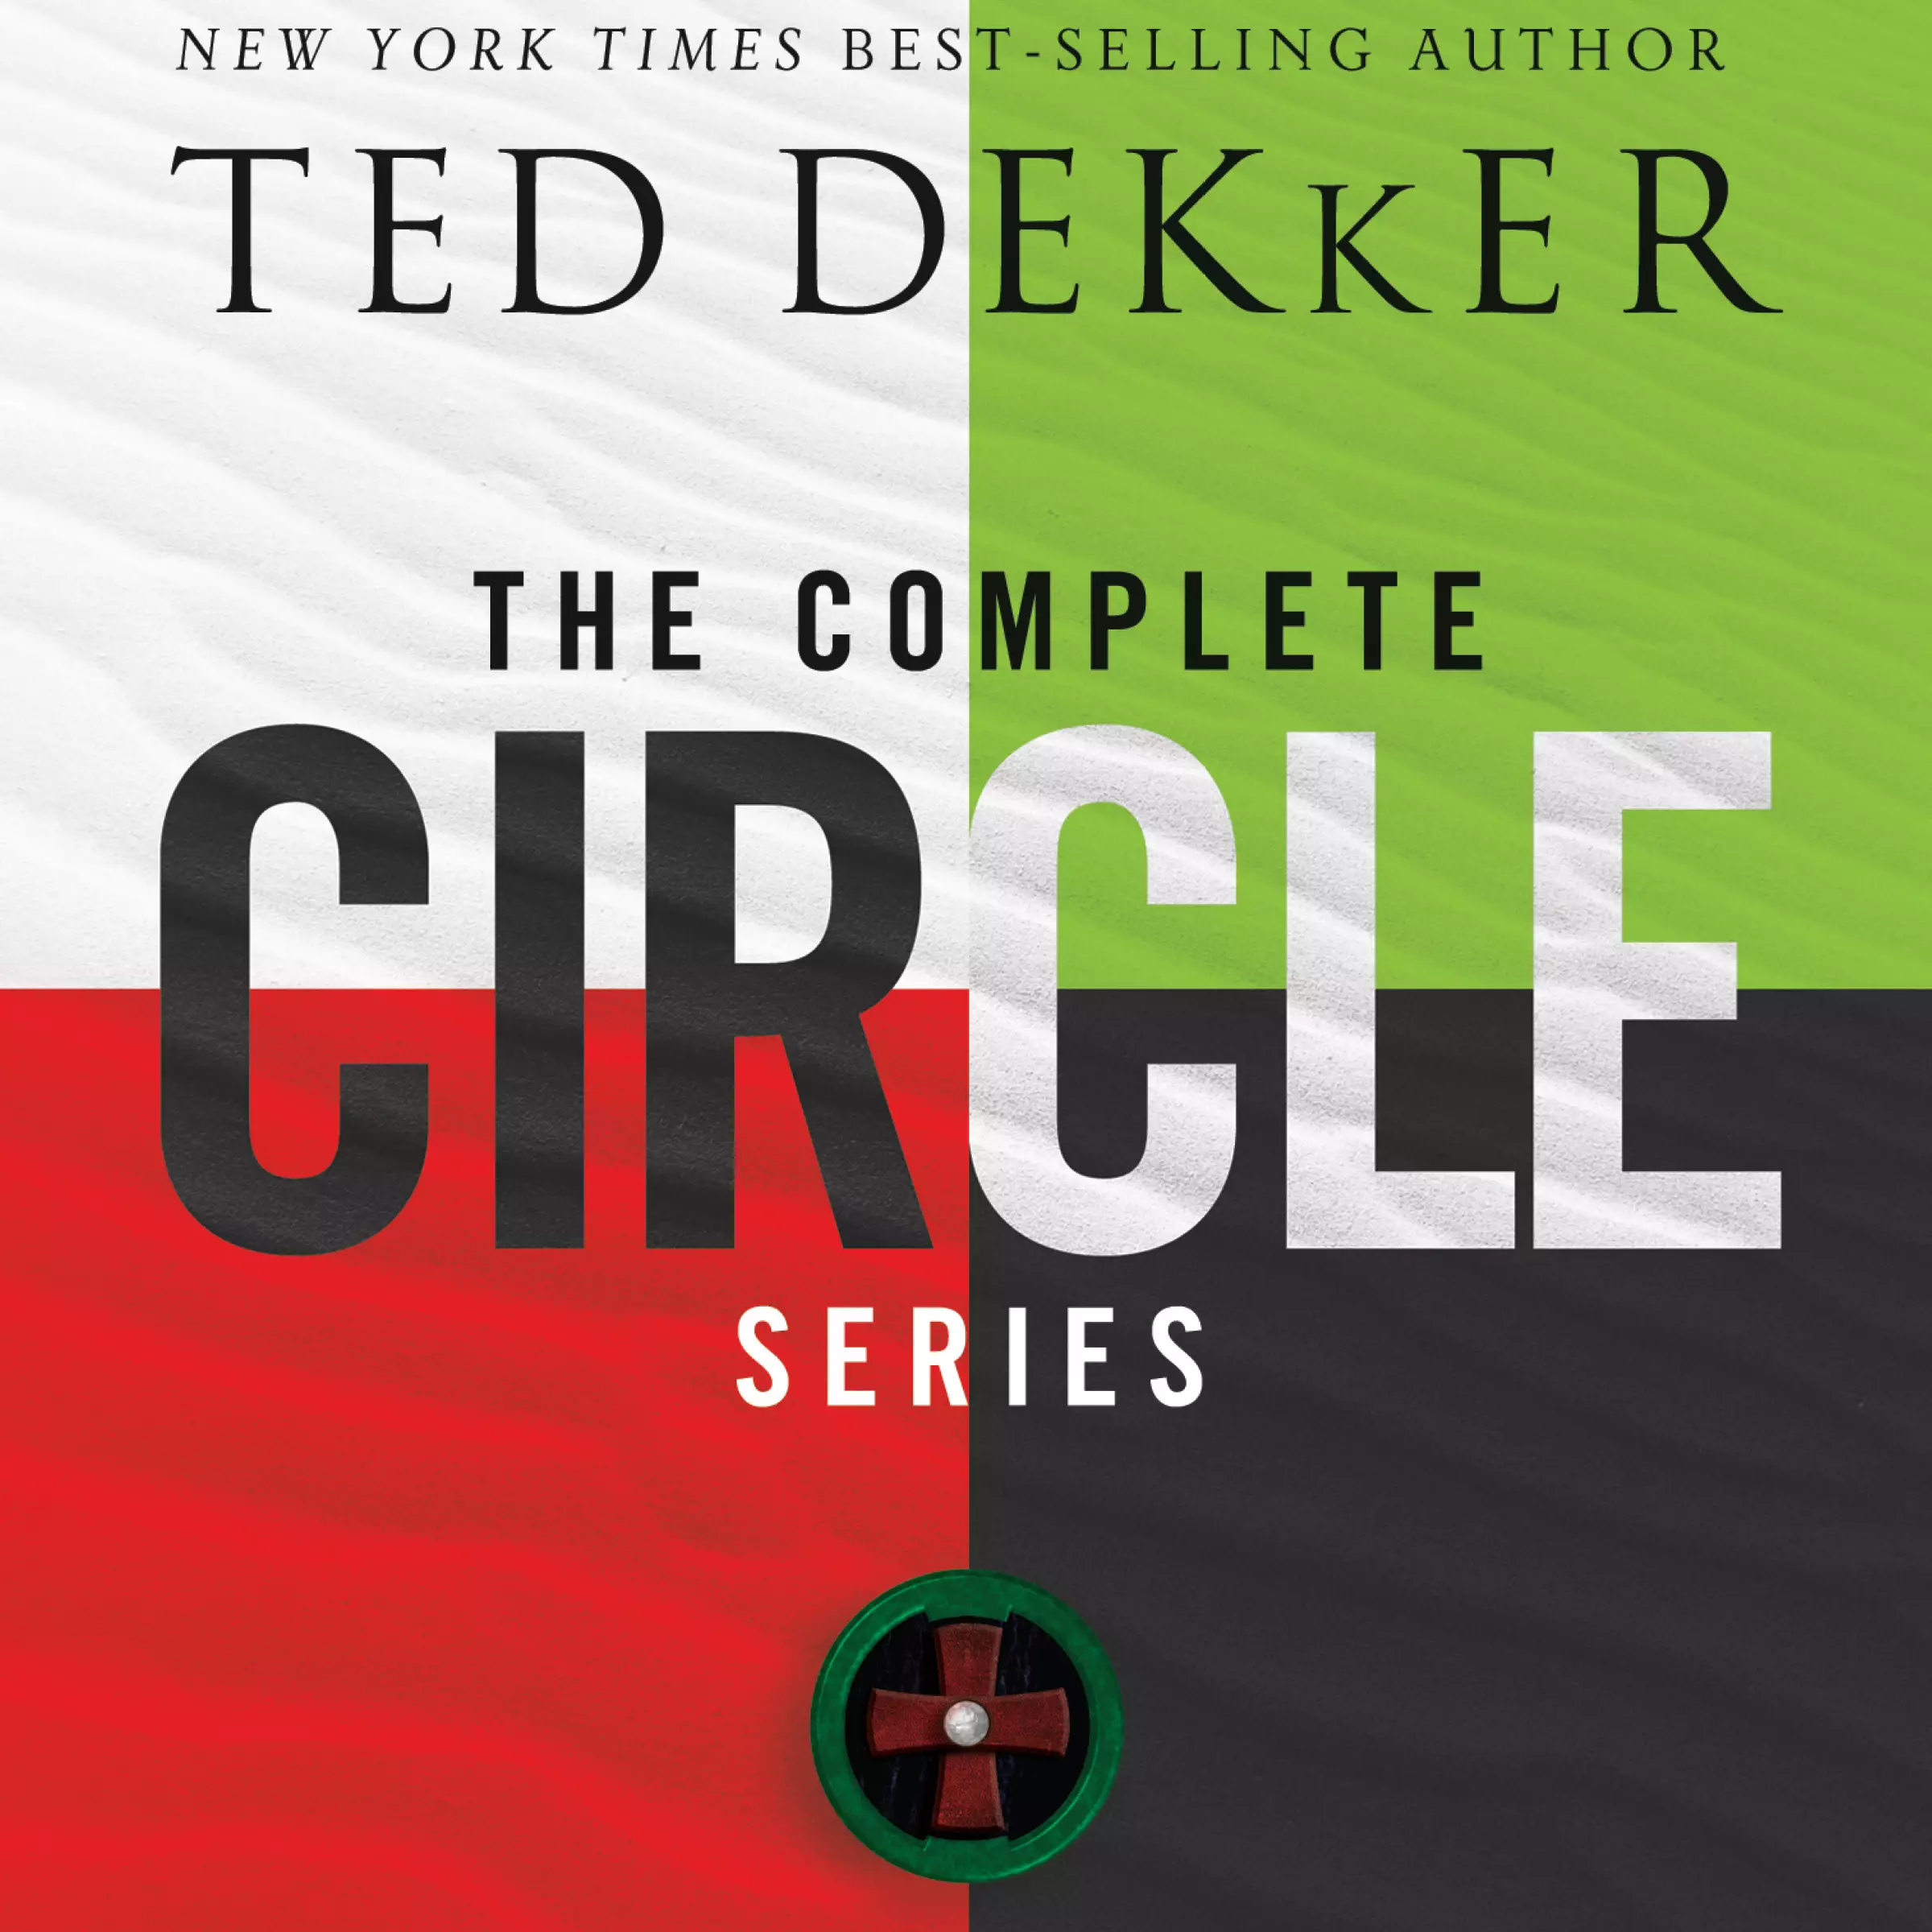 Complete Circle Series